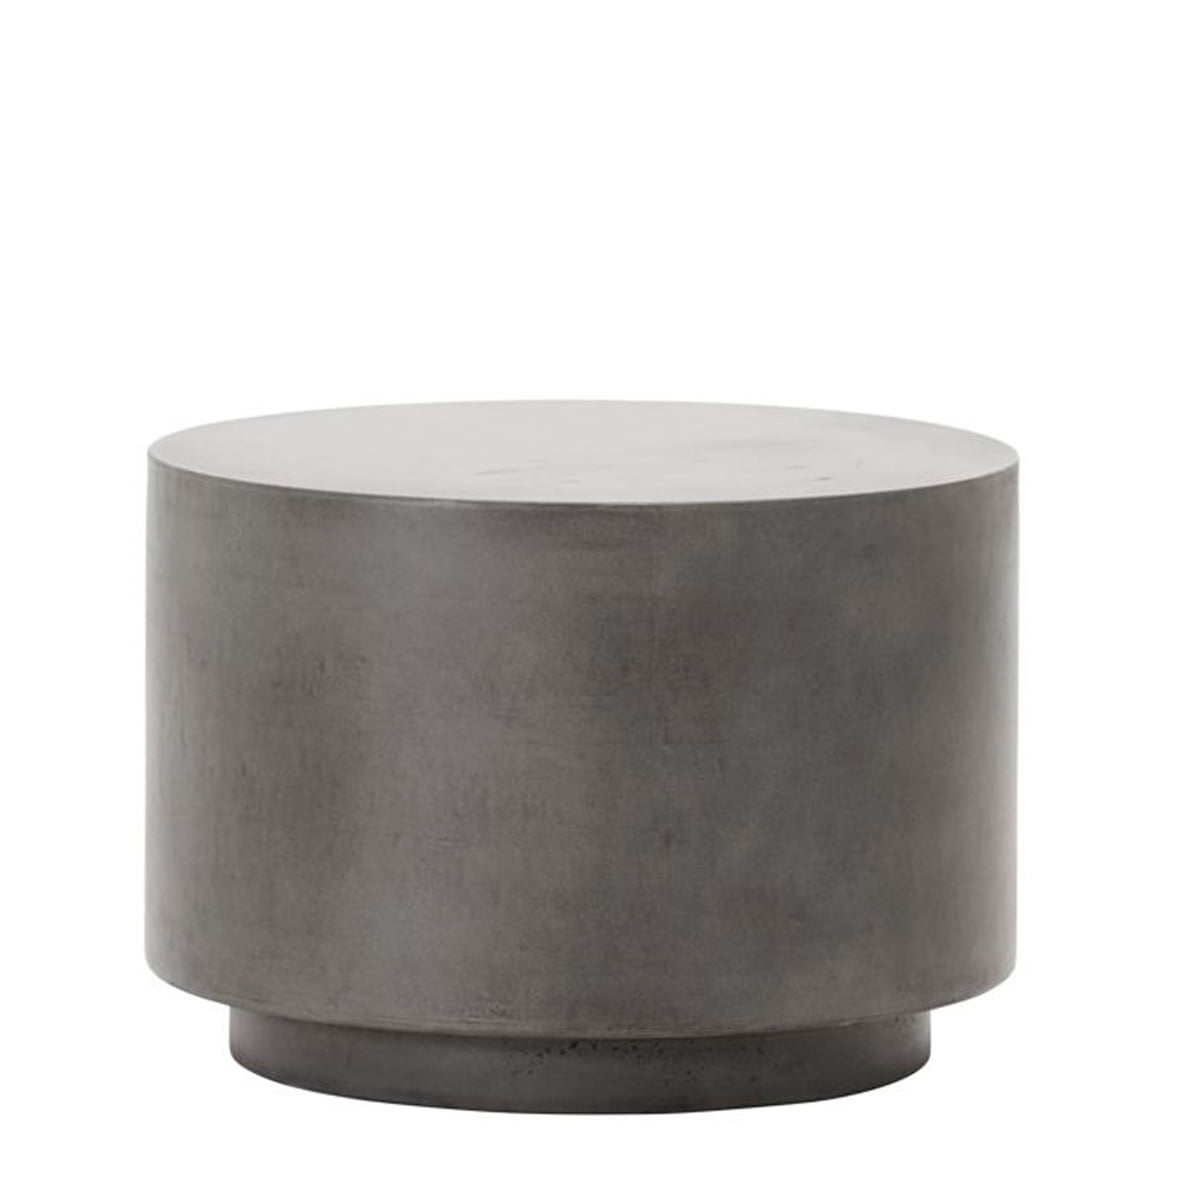 House Doctor - Out Concrete side table |